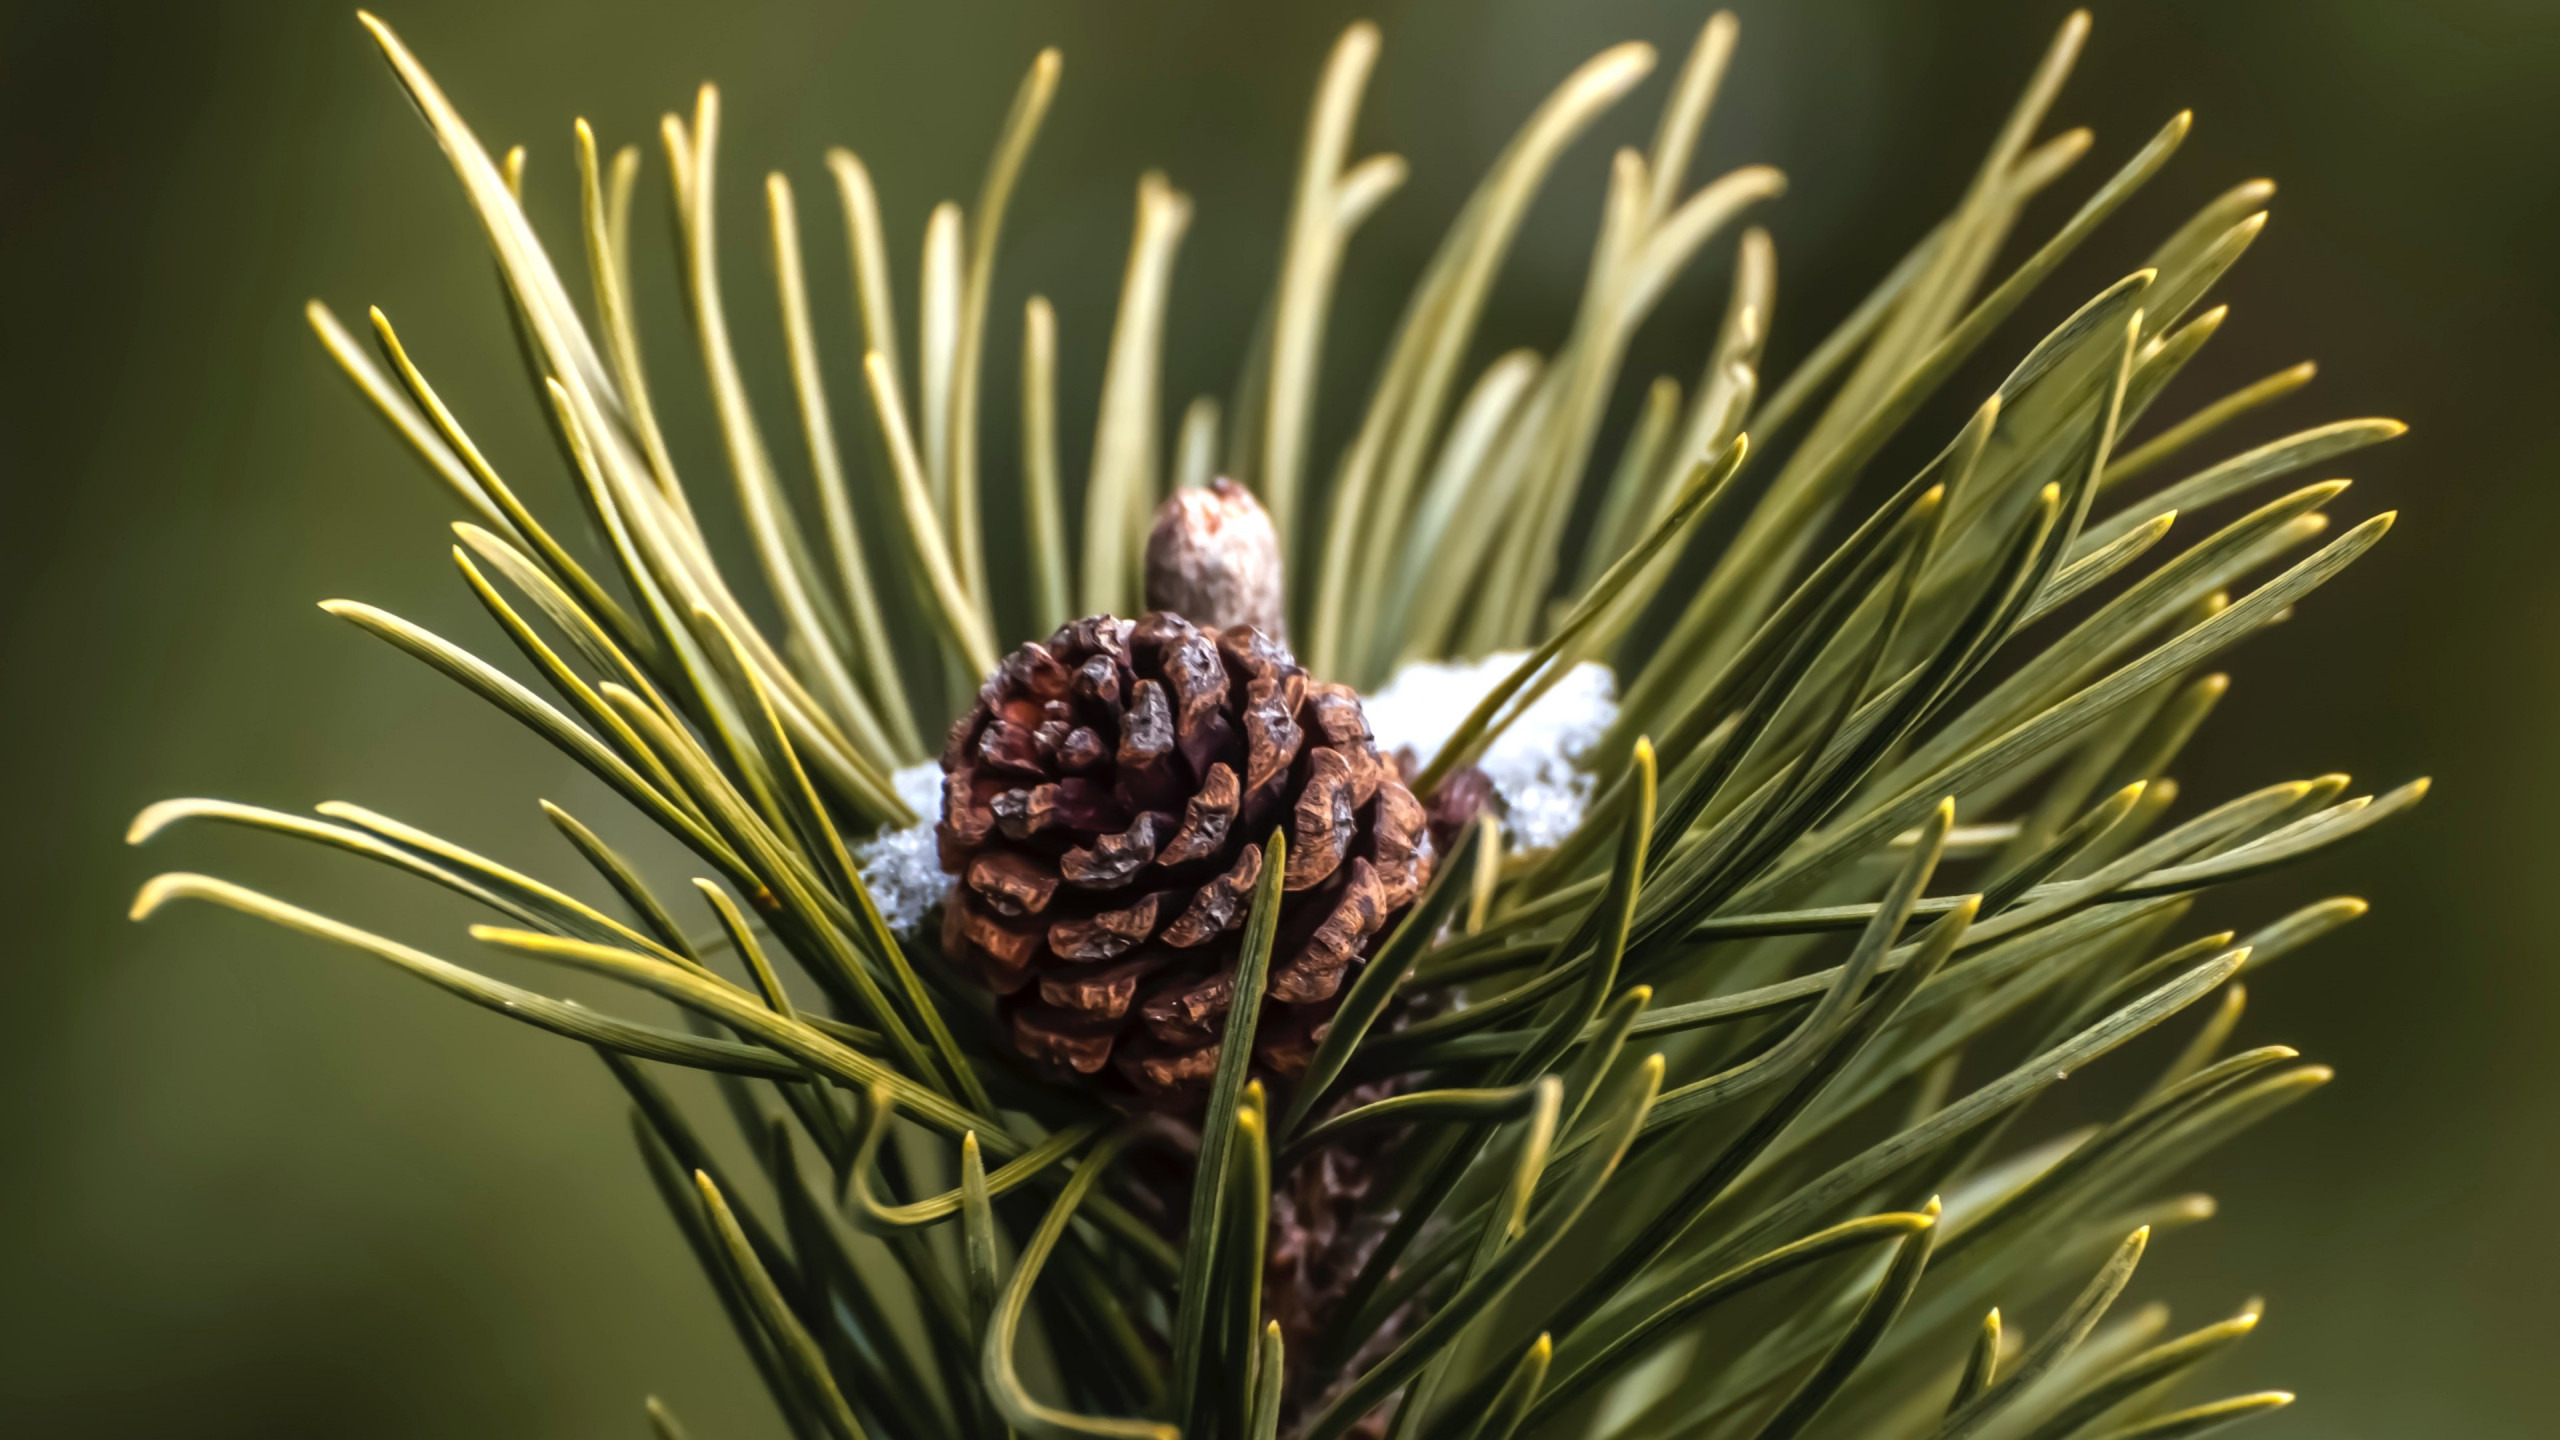 Cone and pine needles wallpaper 2560x1440